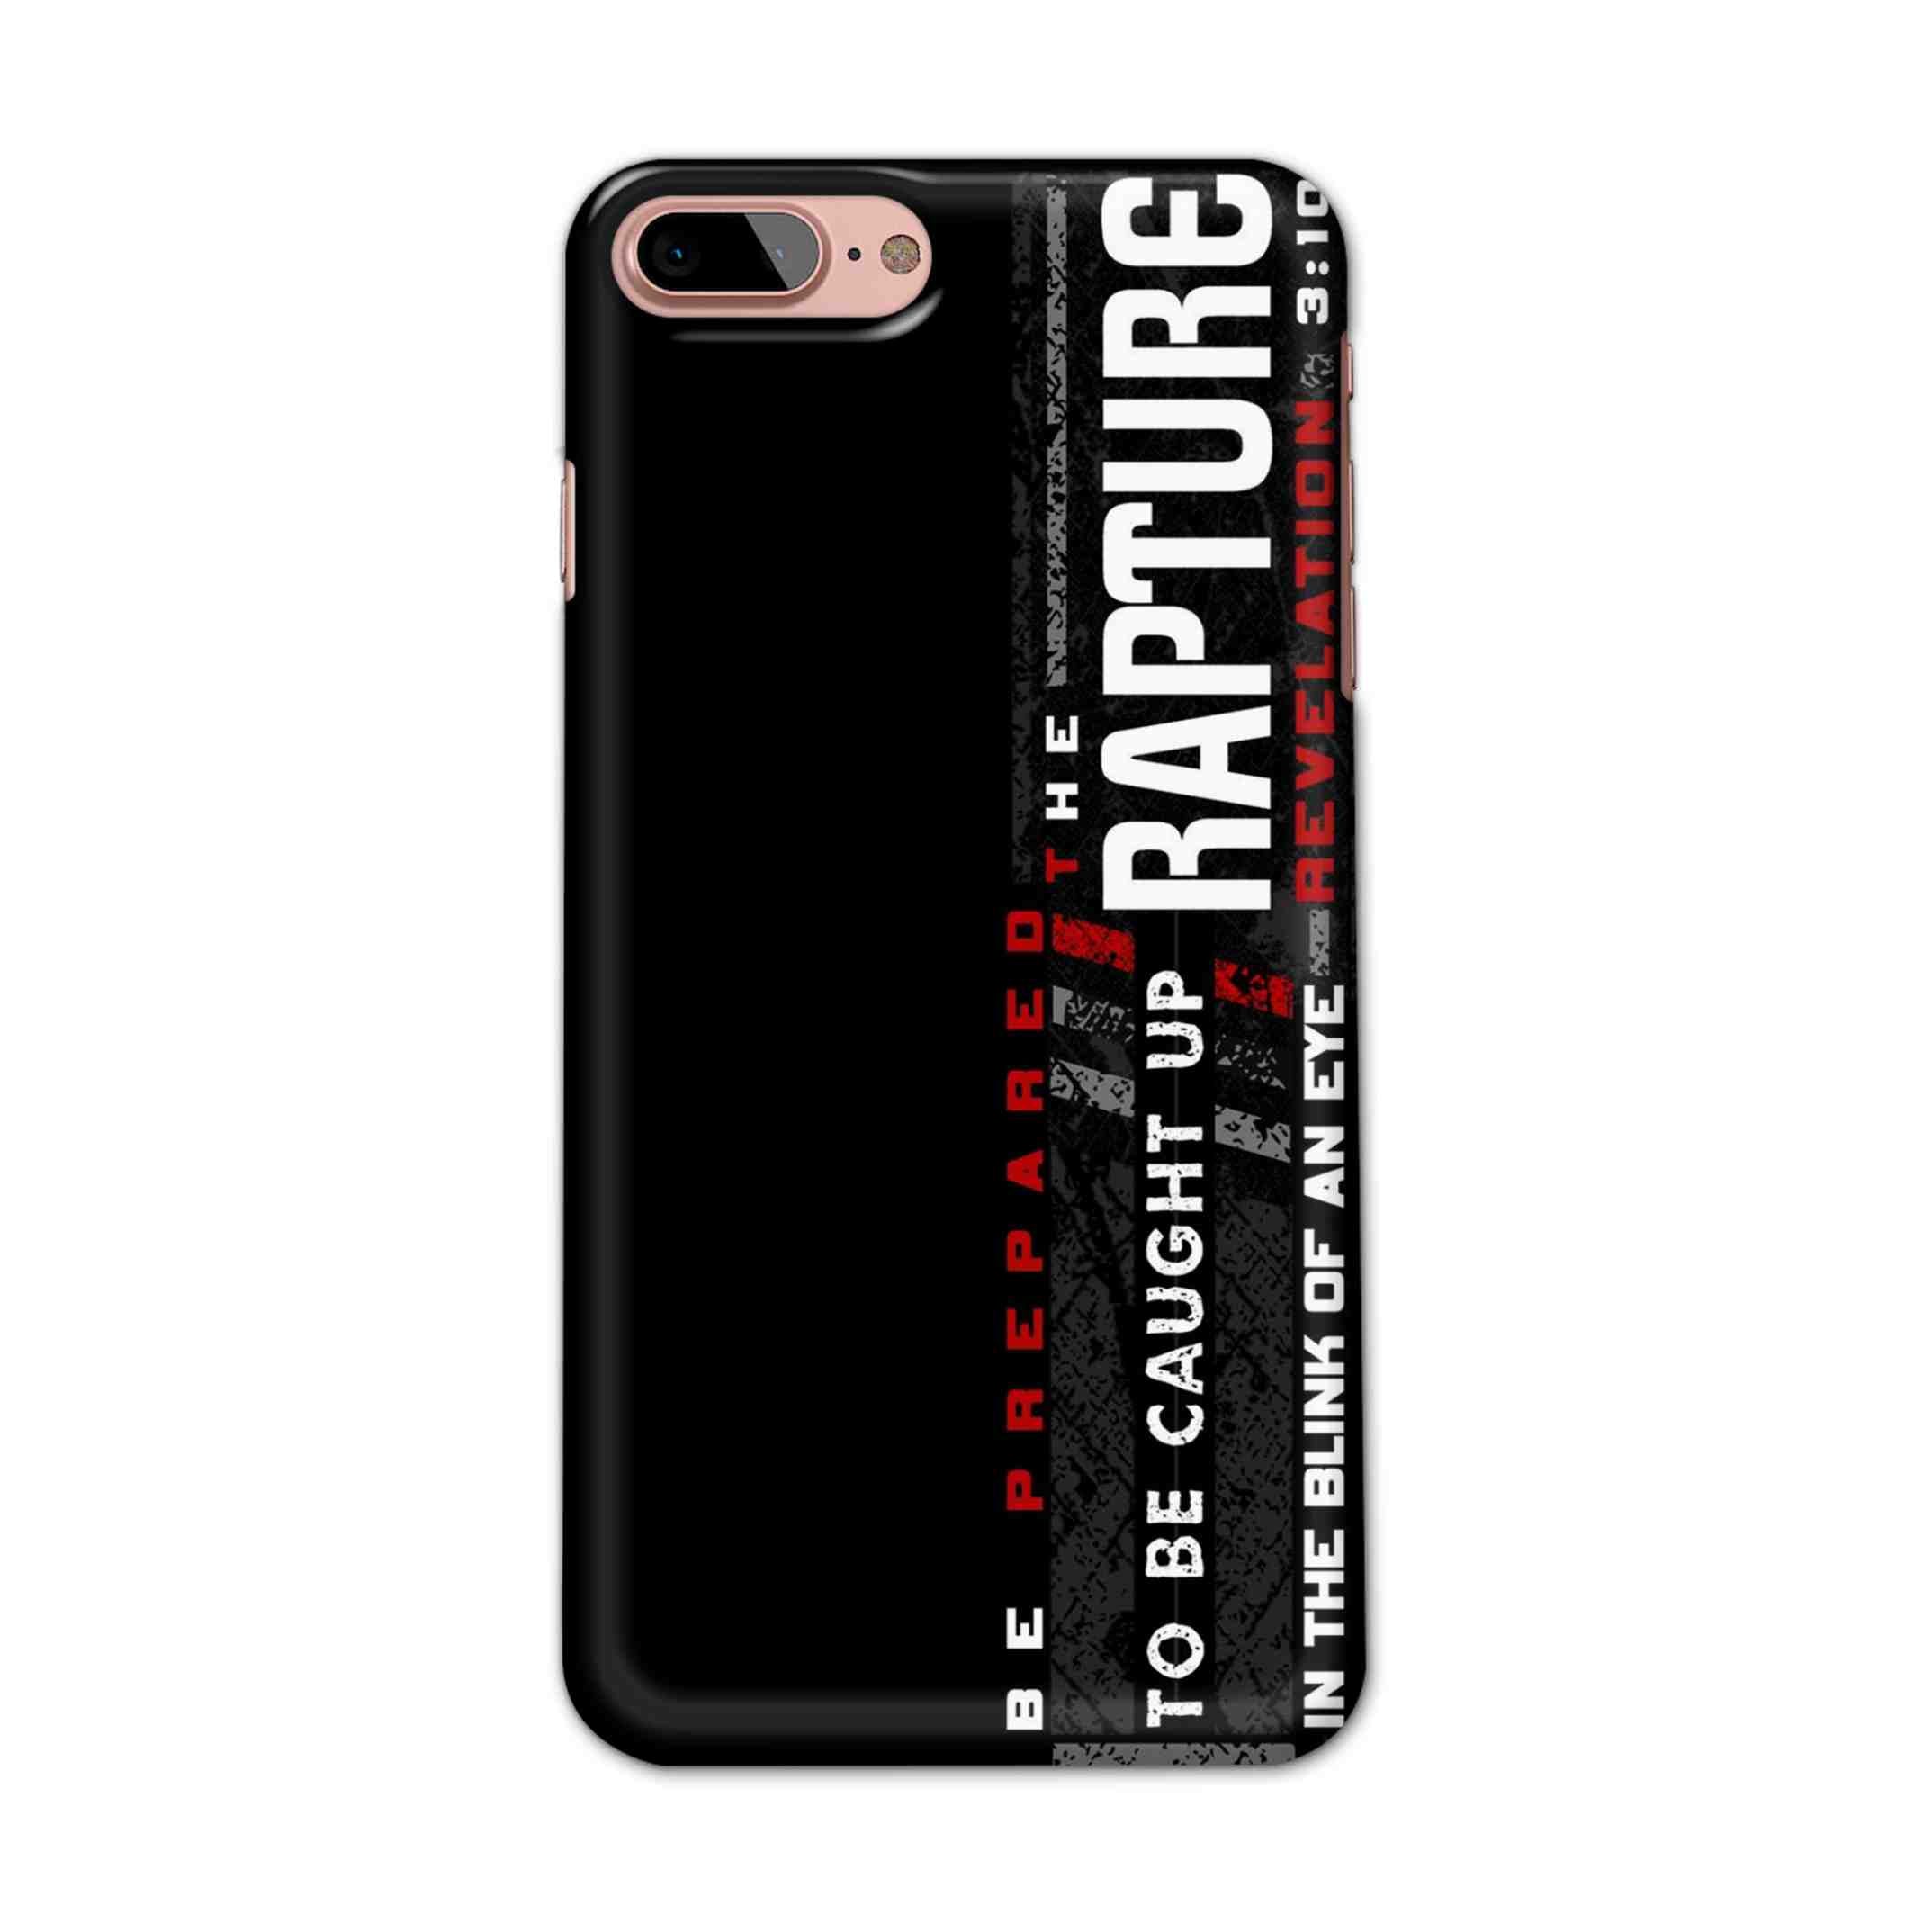 Buy Rapture Hard Back Mobile Phone Case/Cover For iPhone 7 Plus / 8 Plus Online